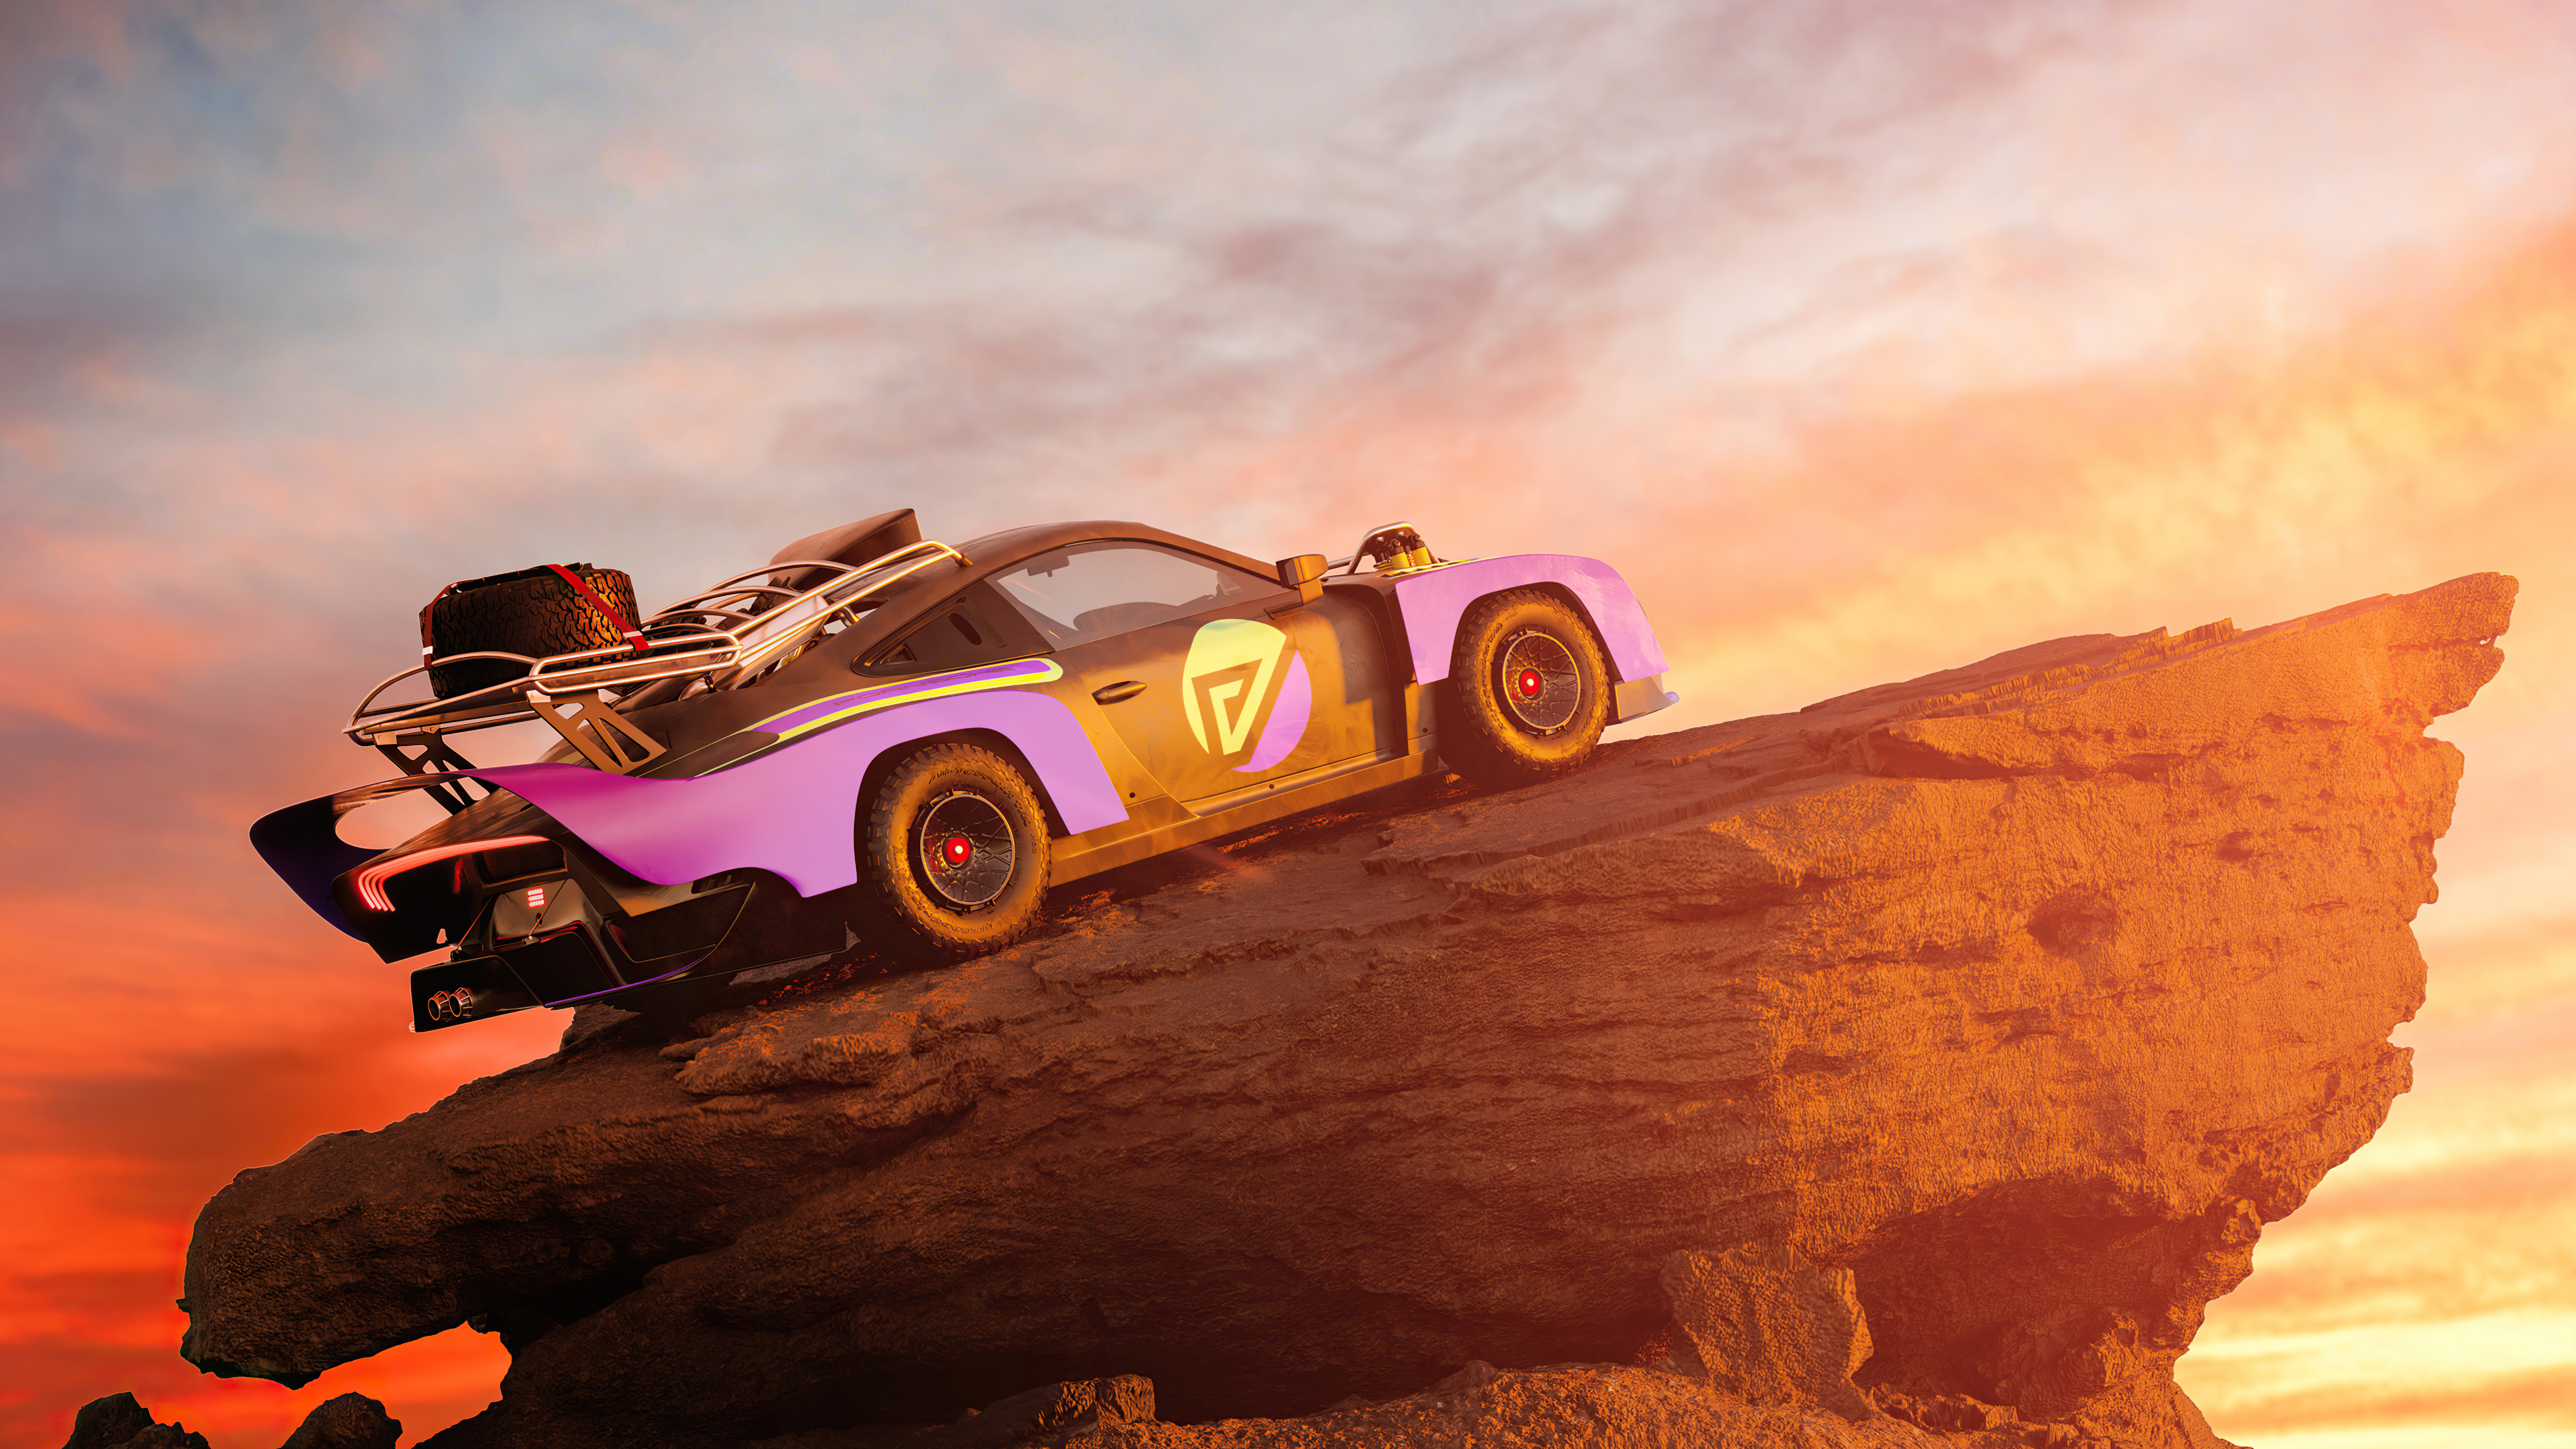 Rendering of the Porsche 935 at sunset